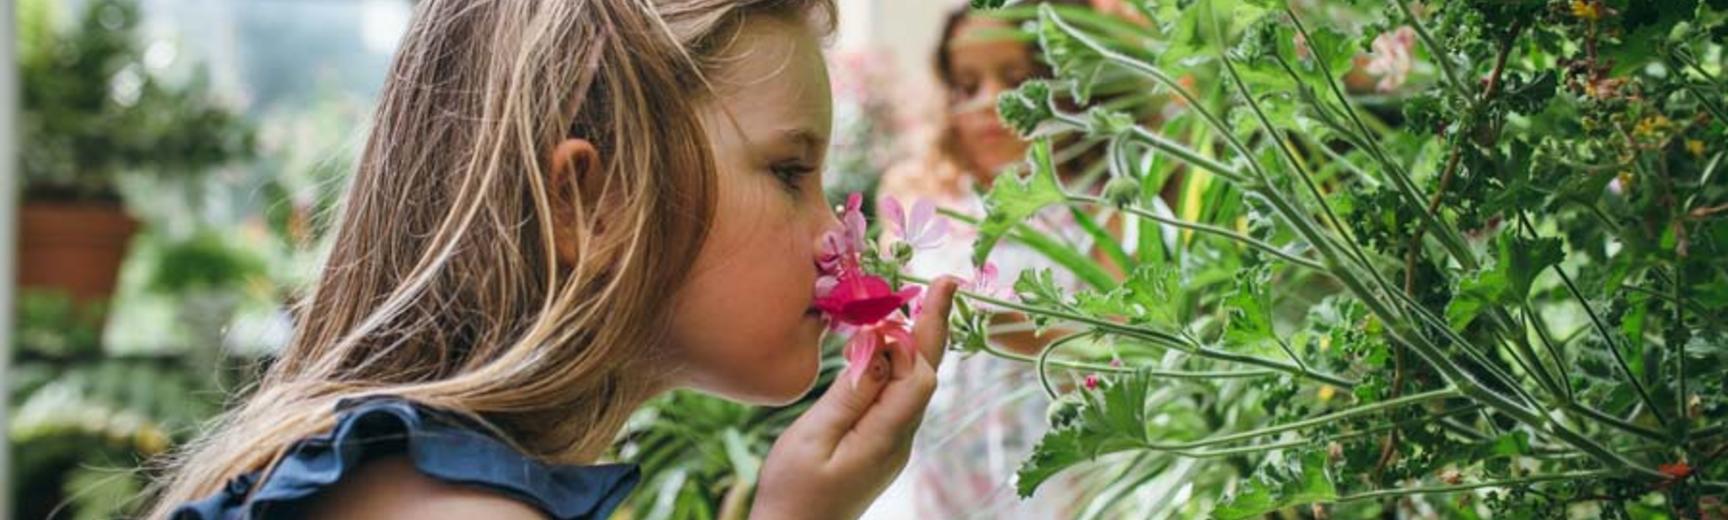 Child in the Conservatory Smelling Flower (Wallman Lo Res)